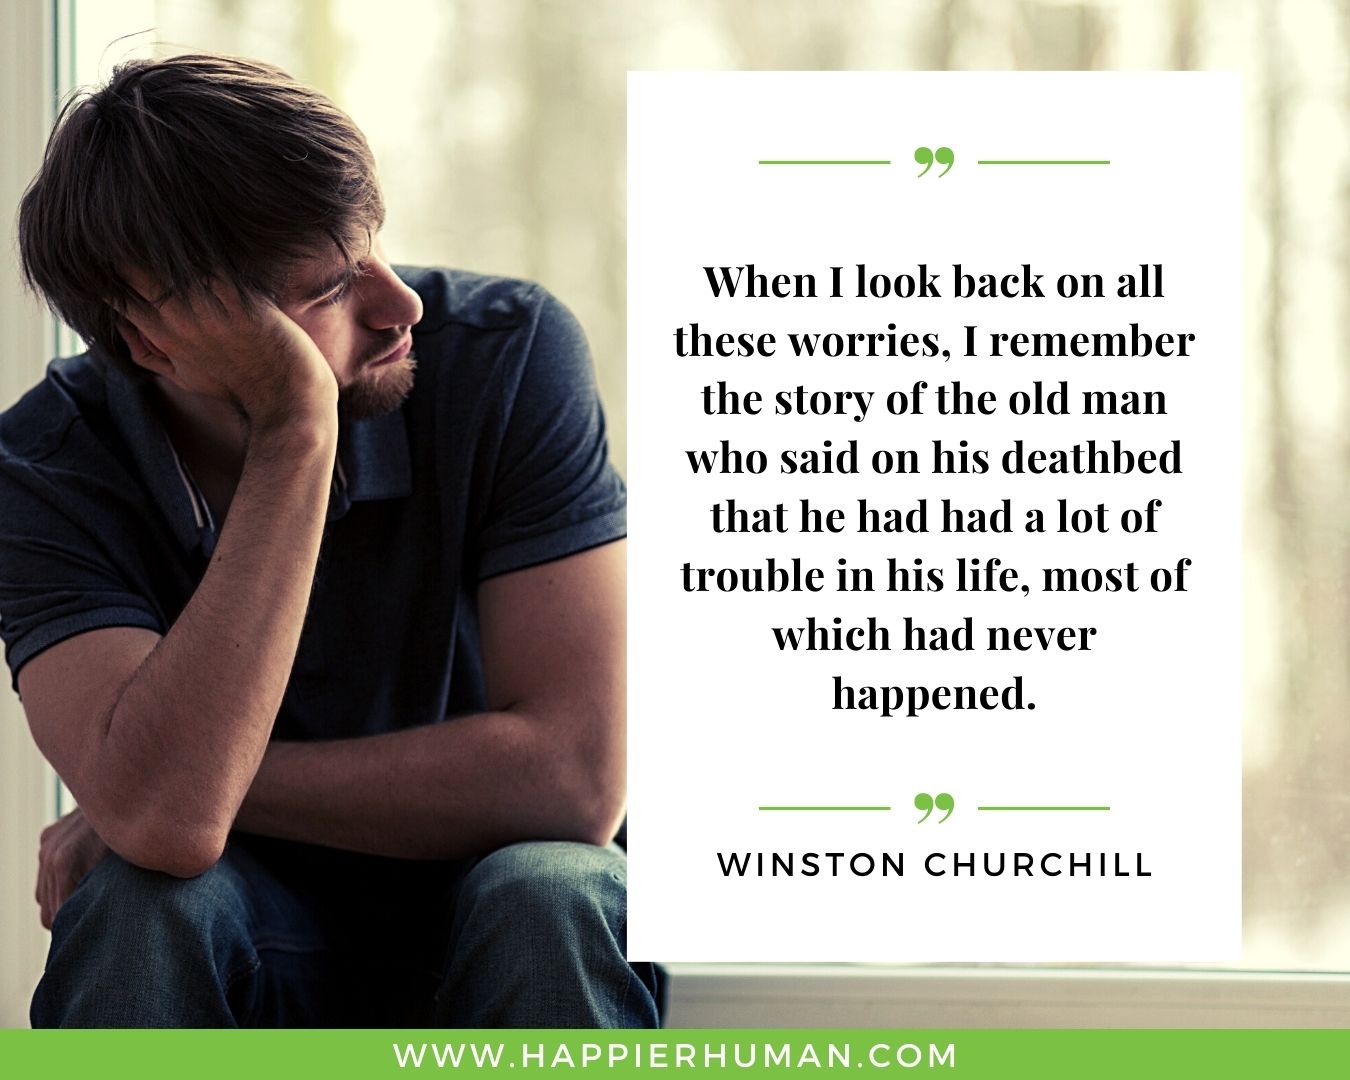 Overthinking Quotes - “When I look back on all these worries, I remember the story of the old man who said on his deathbed that he had had a lot of trouble in his life, most of which had never happened.” - Winston Churchill